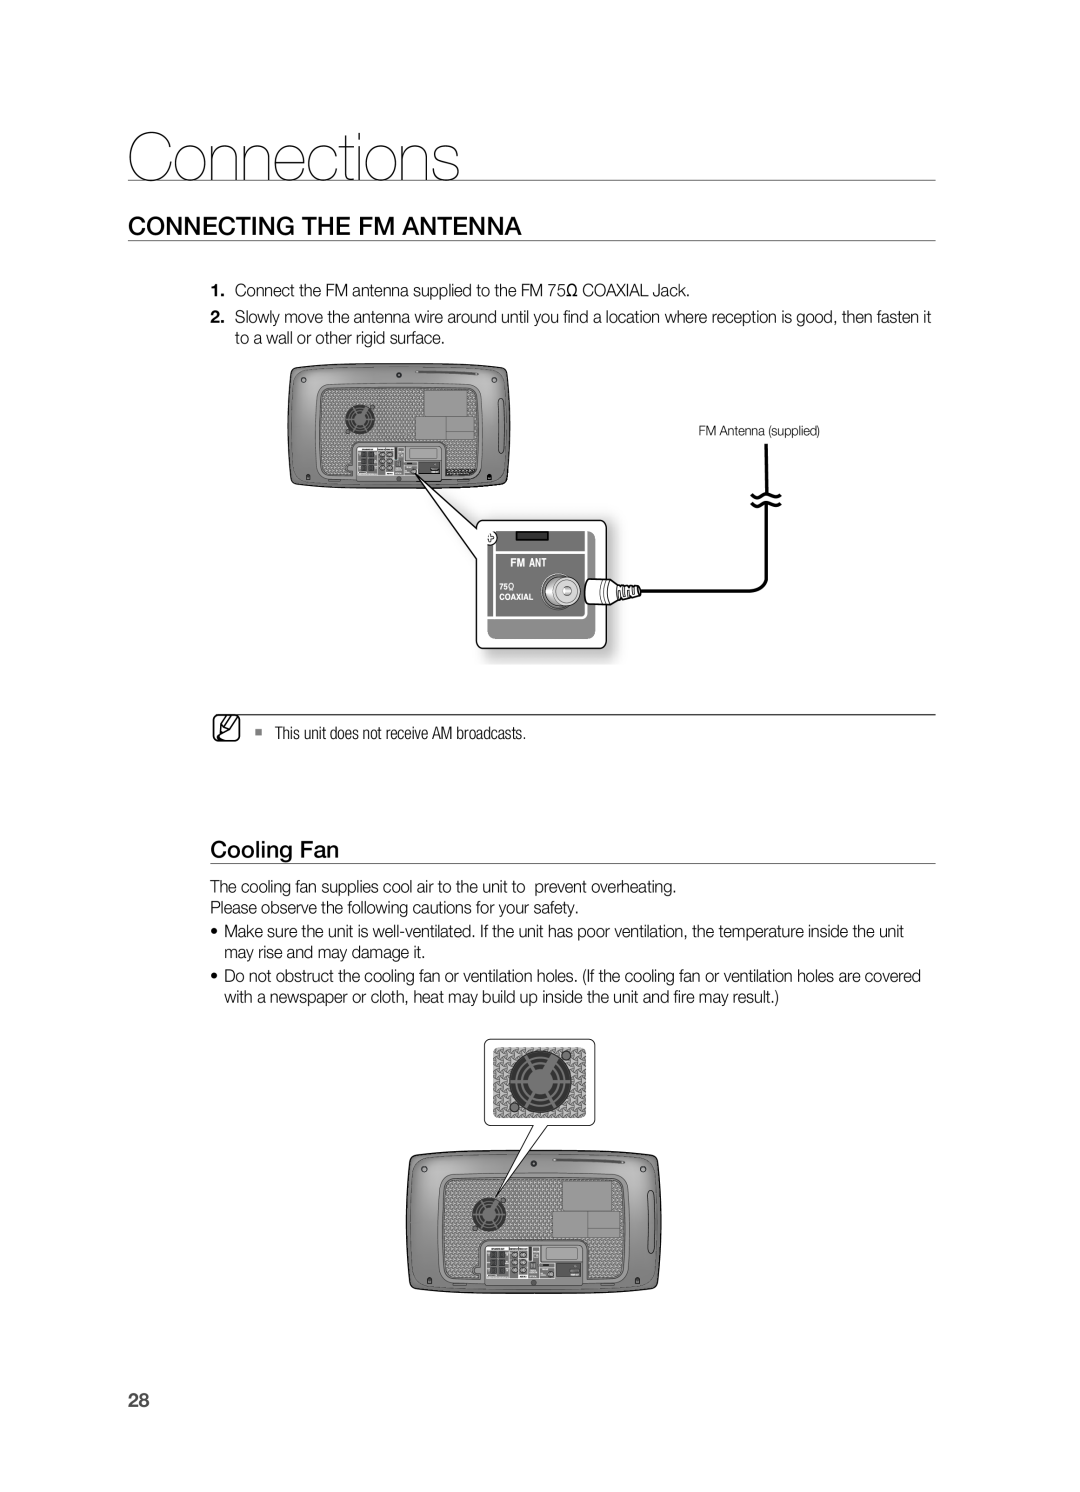 Samsung HT-X725G, HT-TX725G user manual Connecting The Fm Antenna, Connections, Cooling Fan 